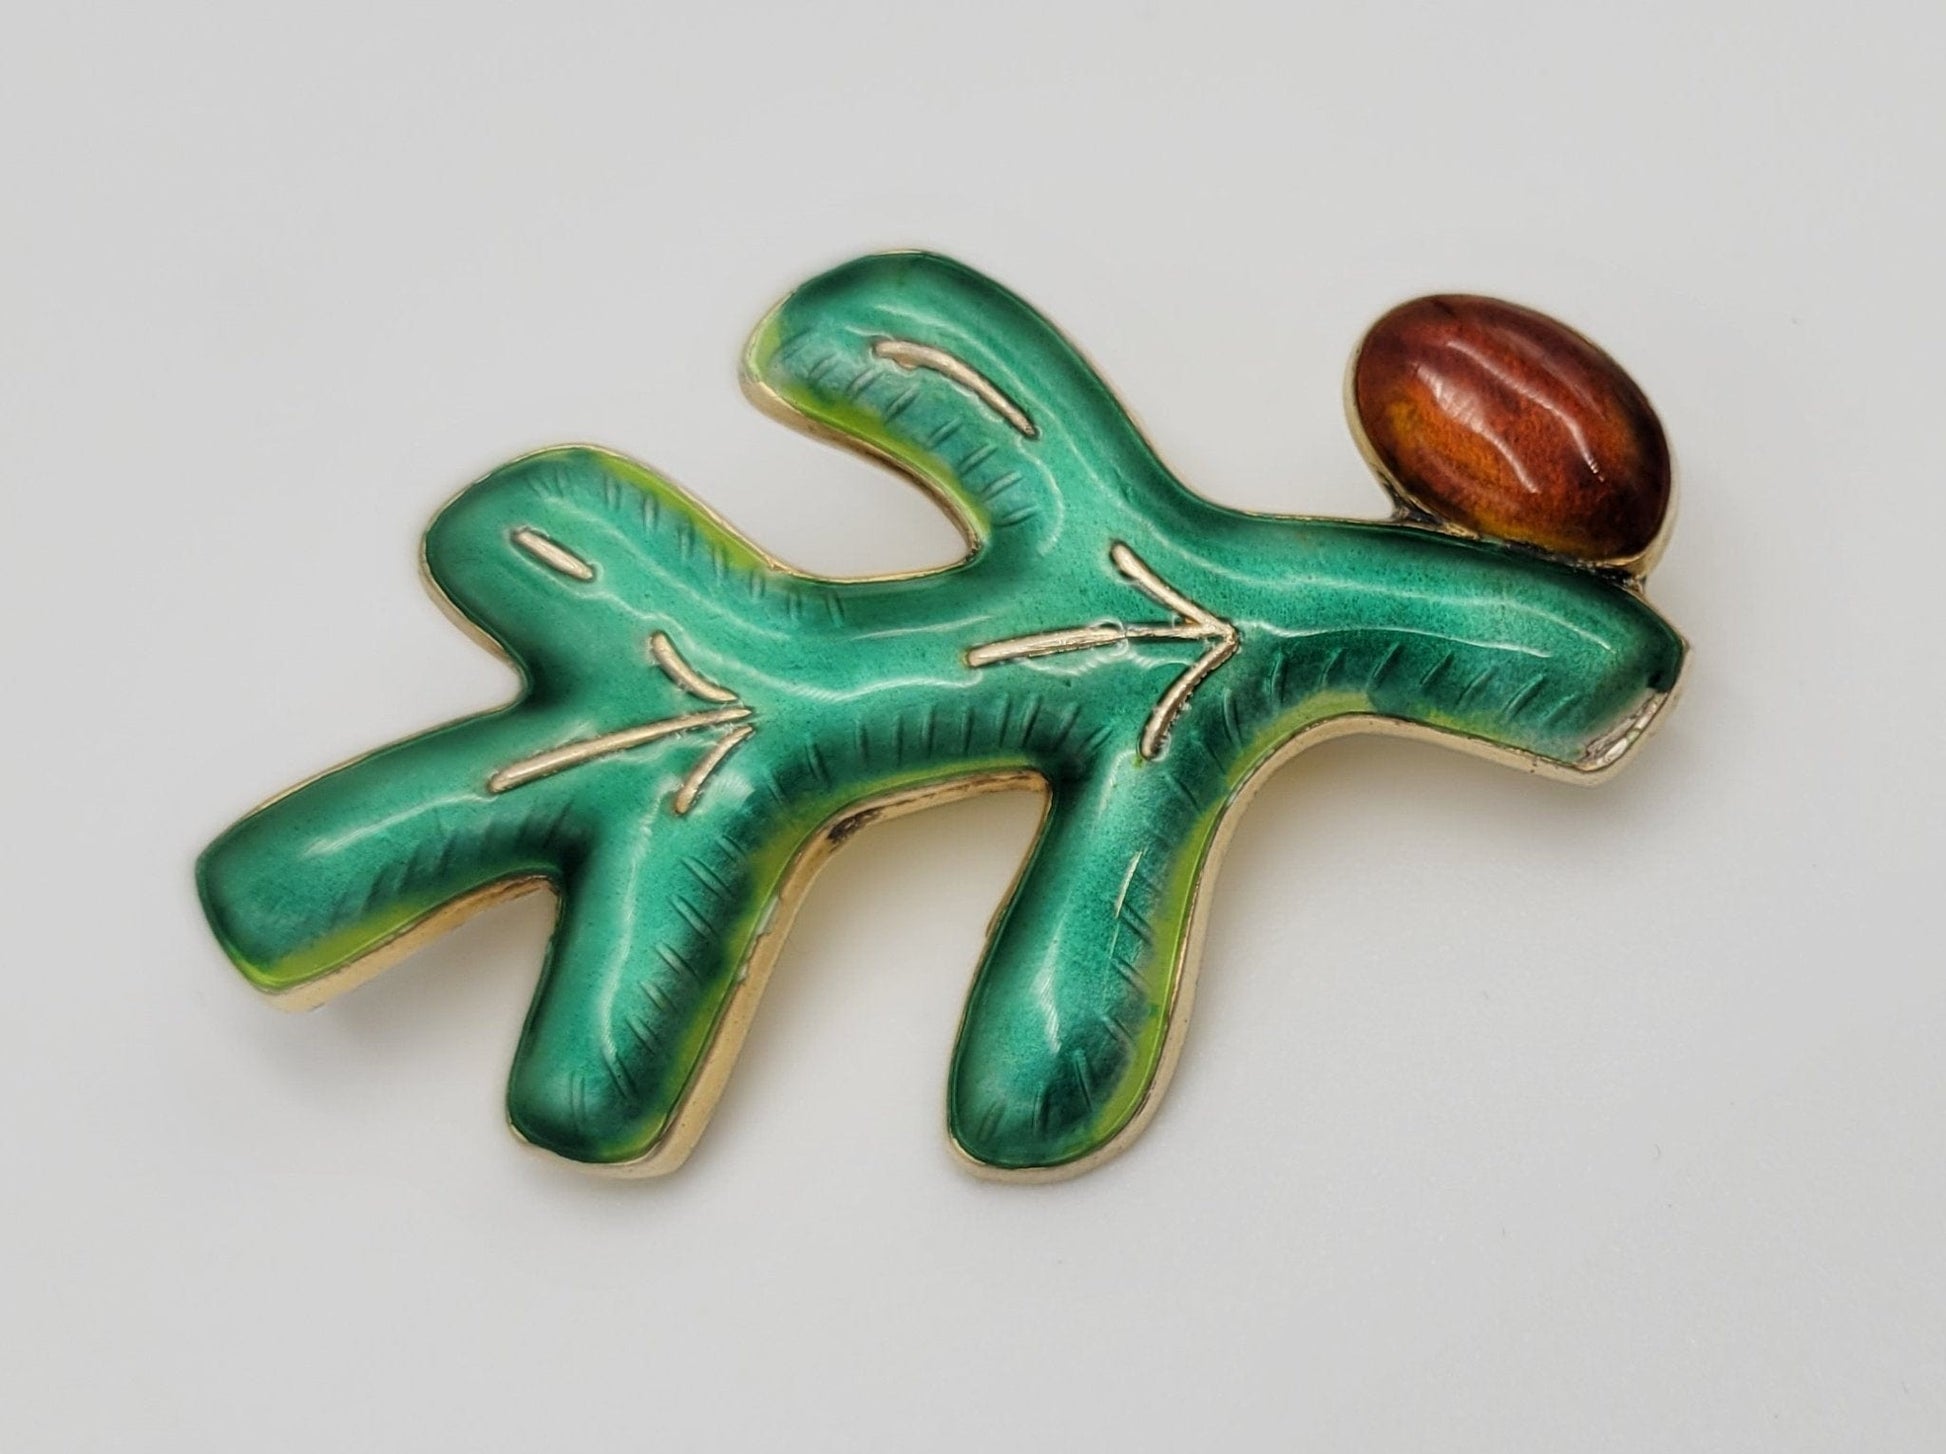 J Tostrup Jewelry J Tostrup Norway Sterling & Guilloche Enamel Holly Berry Leaf Brooch Pin 1950's